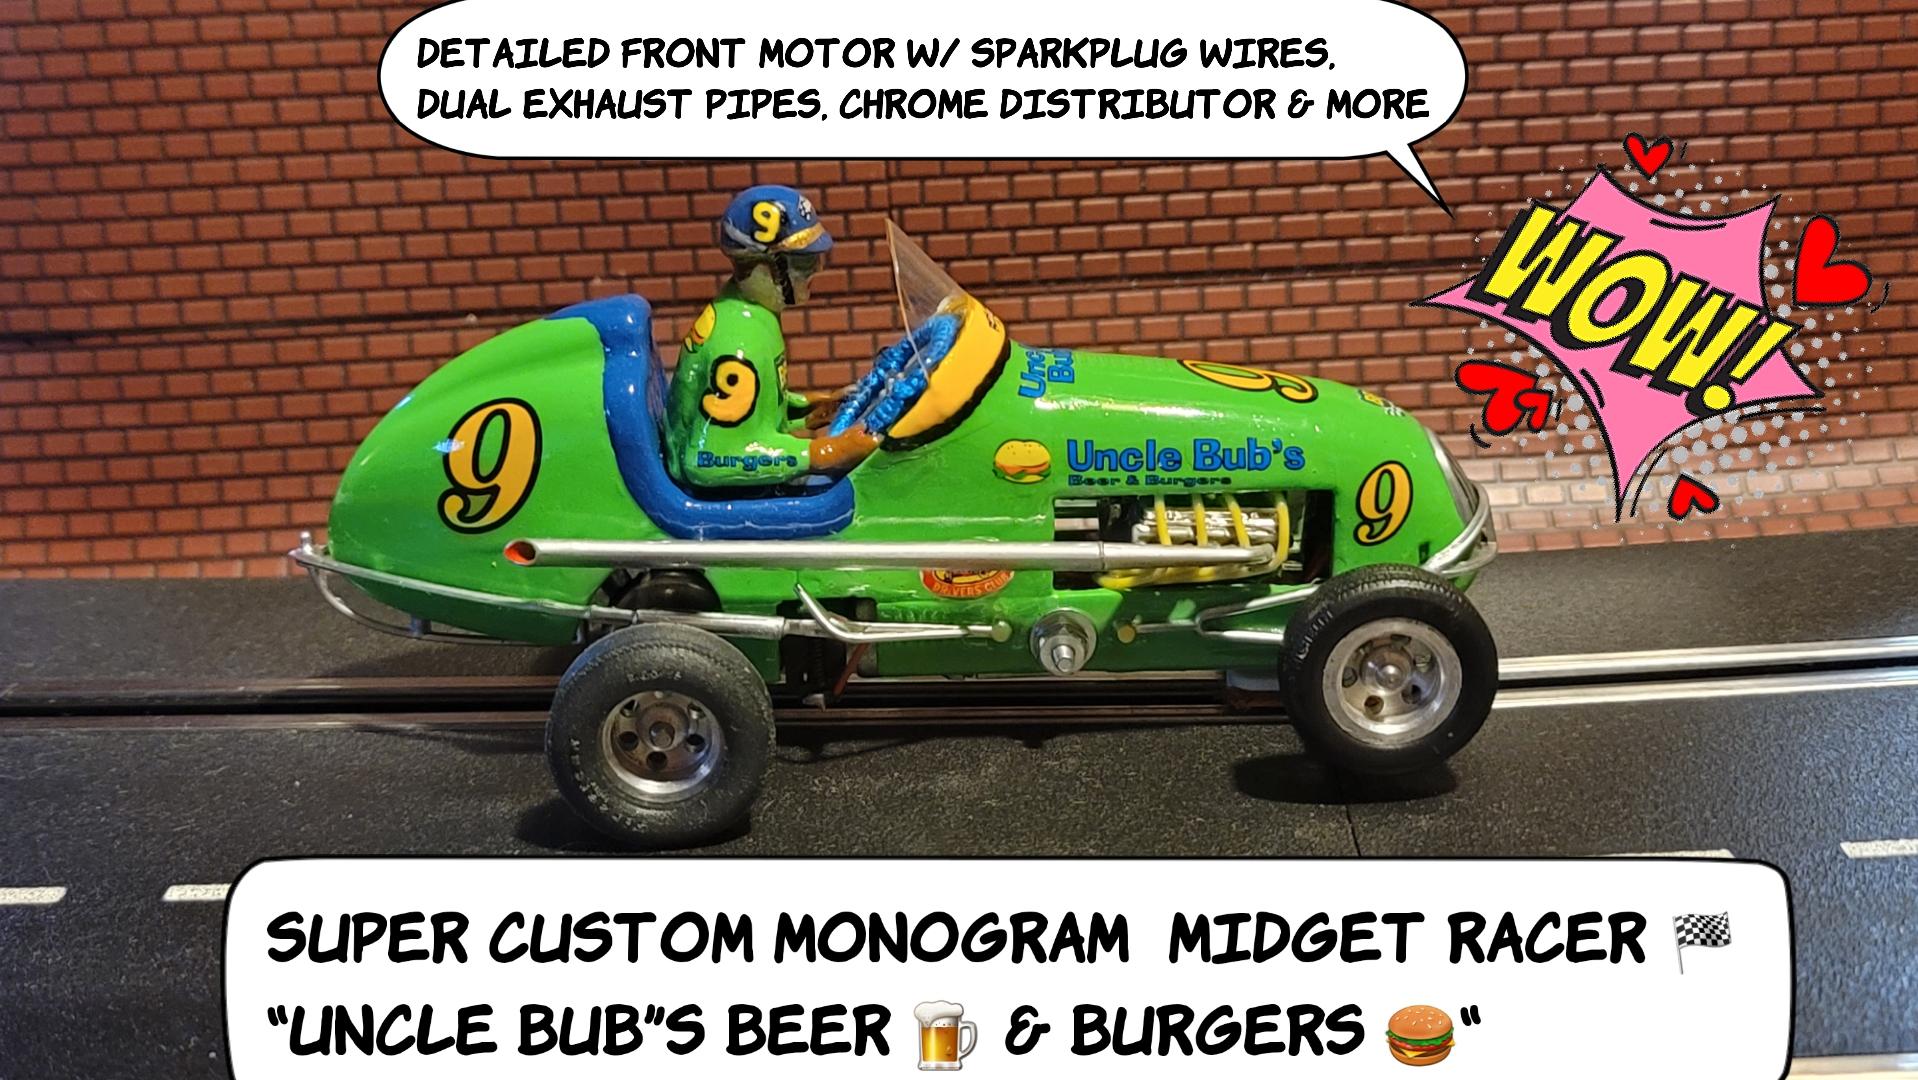 *Sale*, Save $50 off our Ebay $330 Store Sale Price * Monogram Midget Racer “Uncle Bubs Beer & Burgers” Racing Special 1/24 Scale Slot Car 9